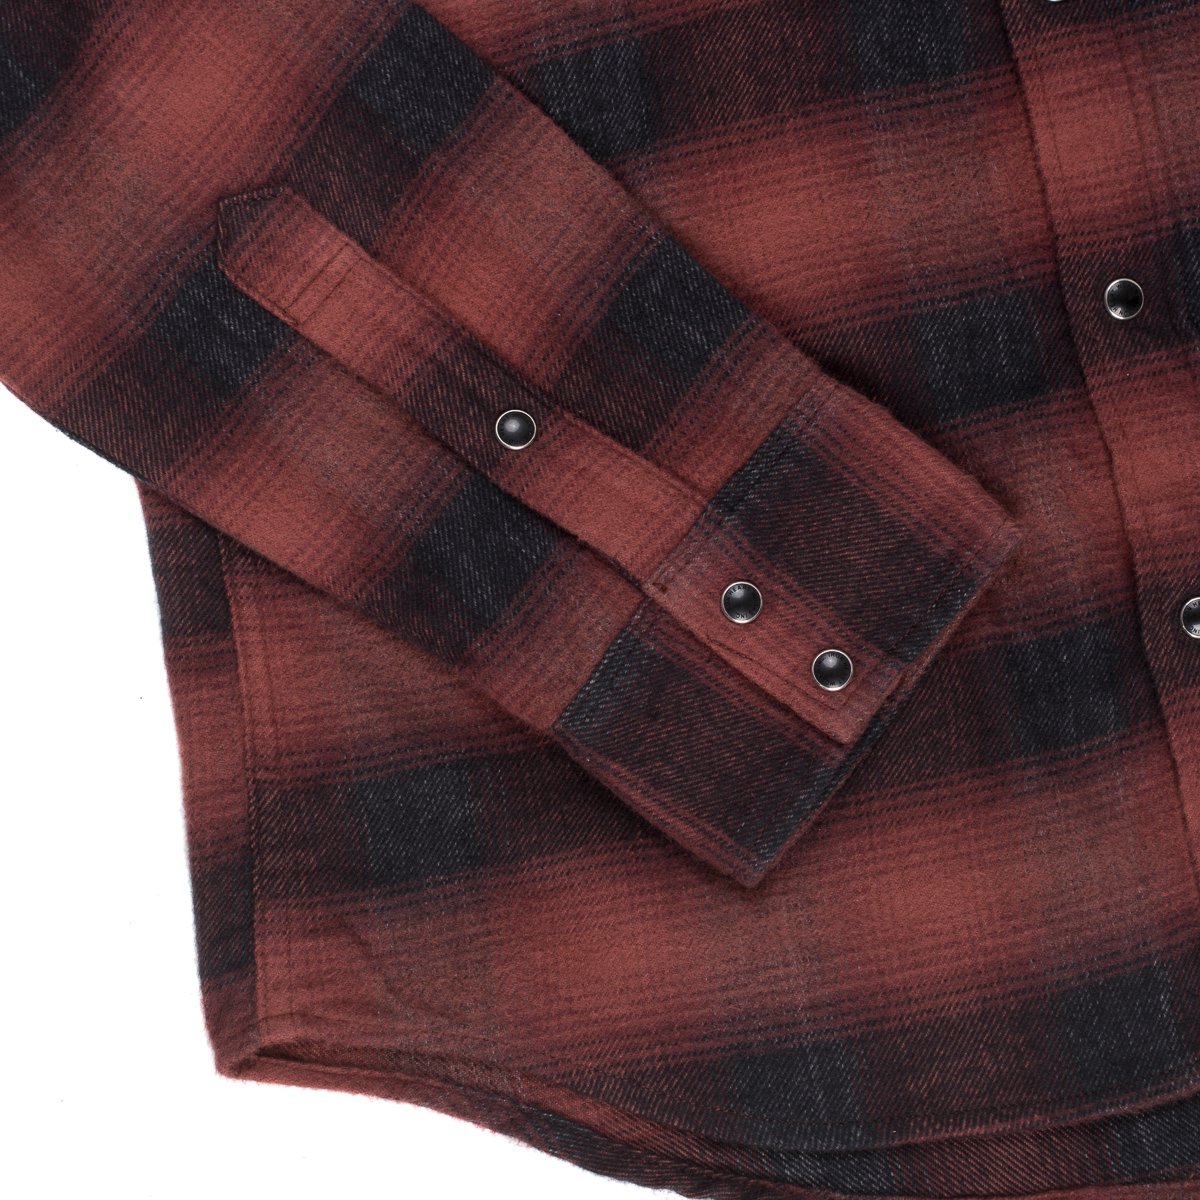 Iron Heart IHSH-195 Red Flannel Shirt